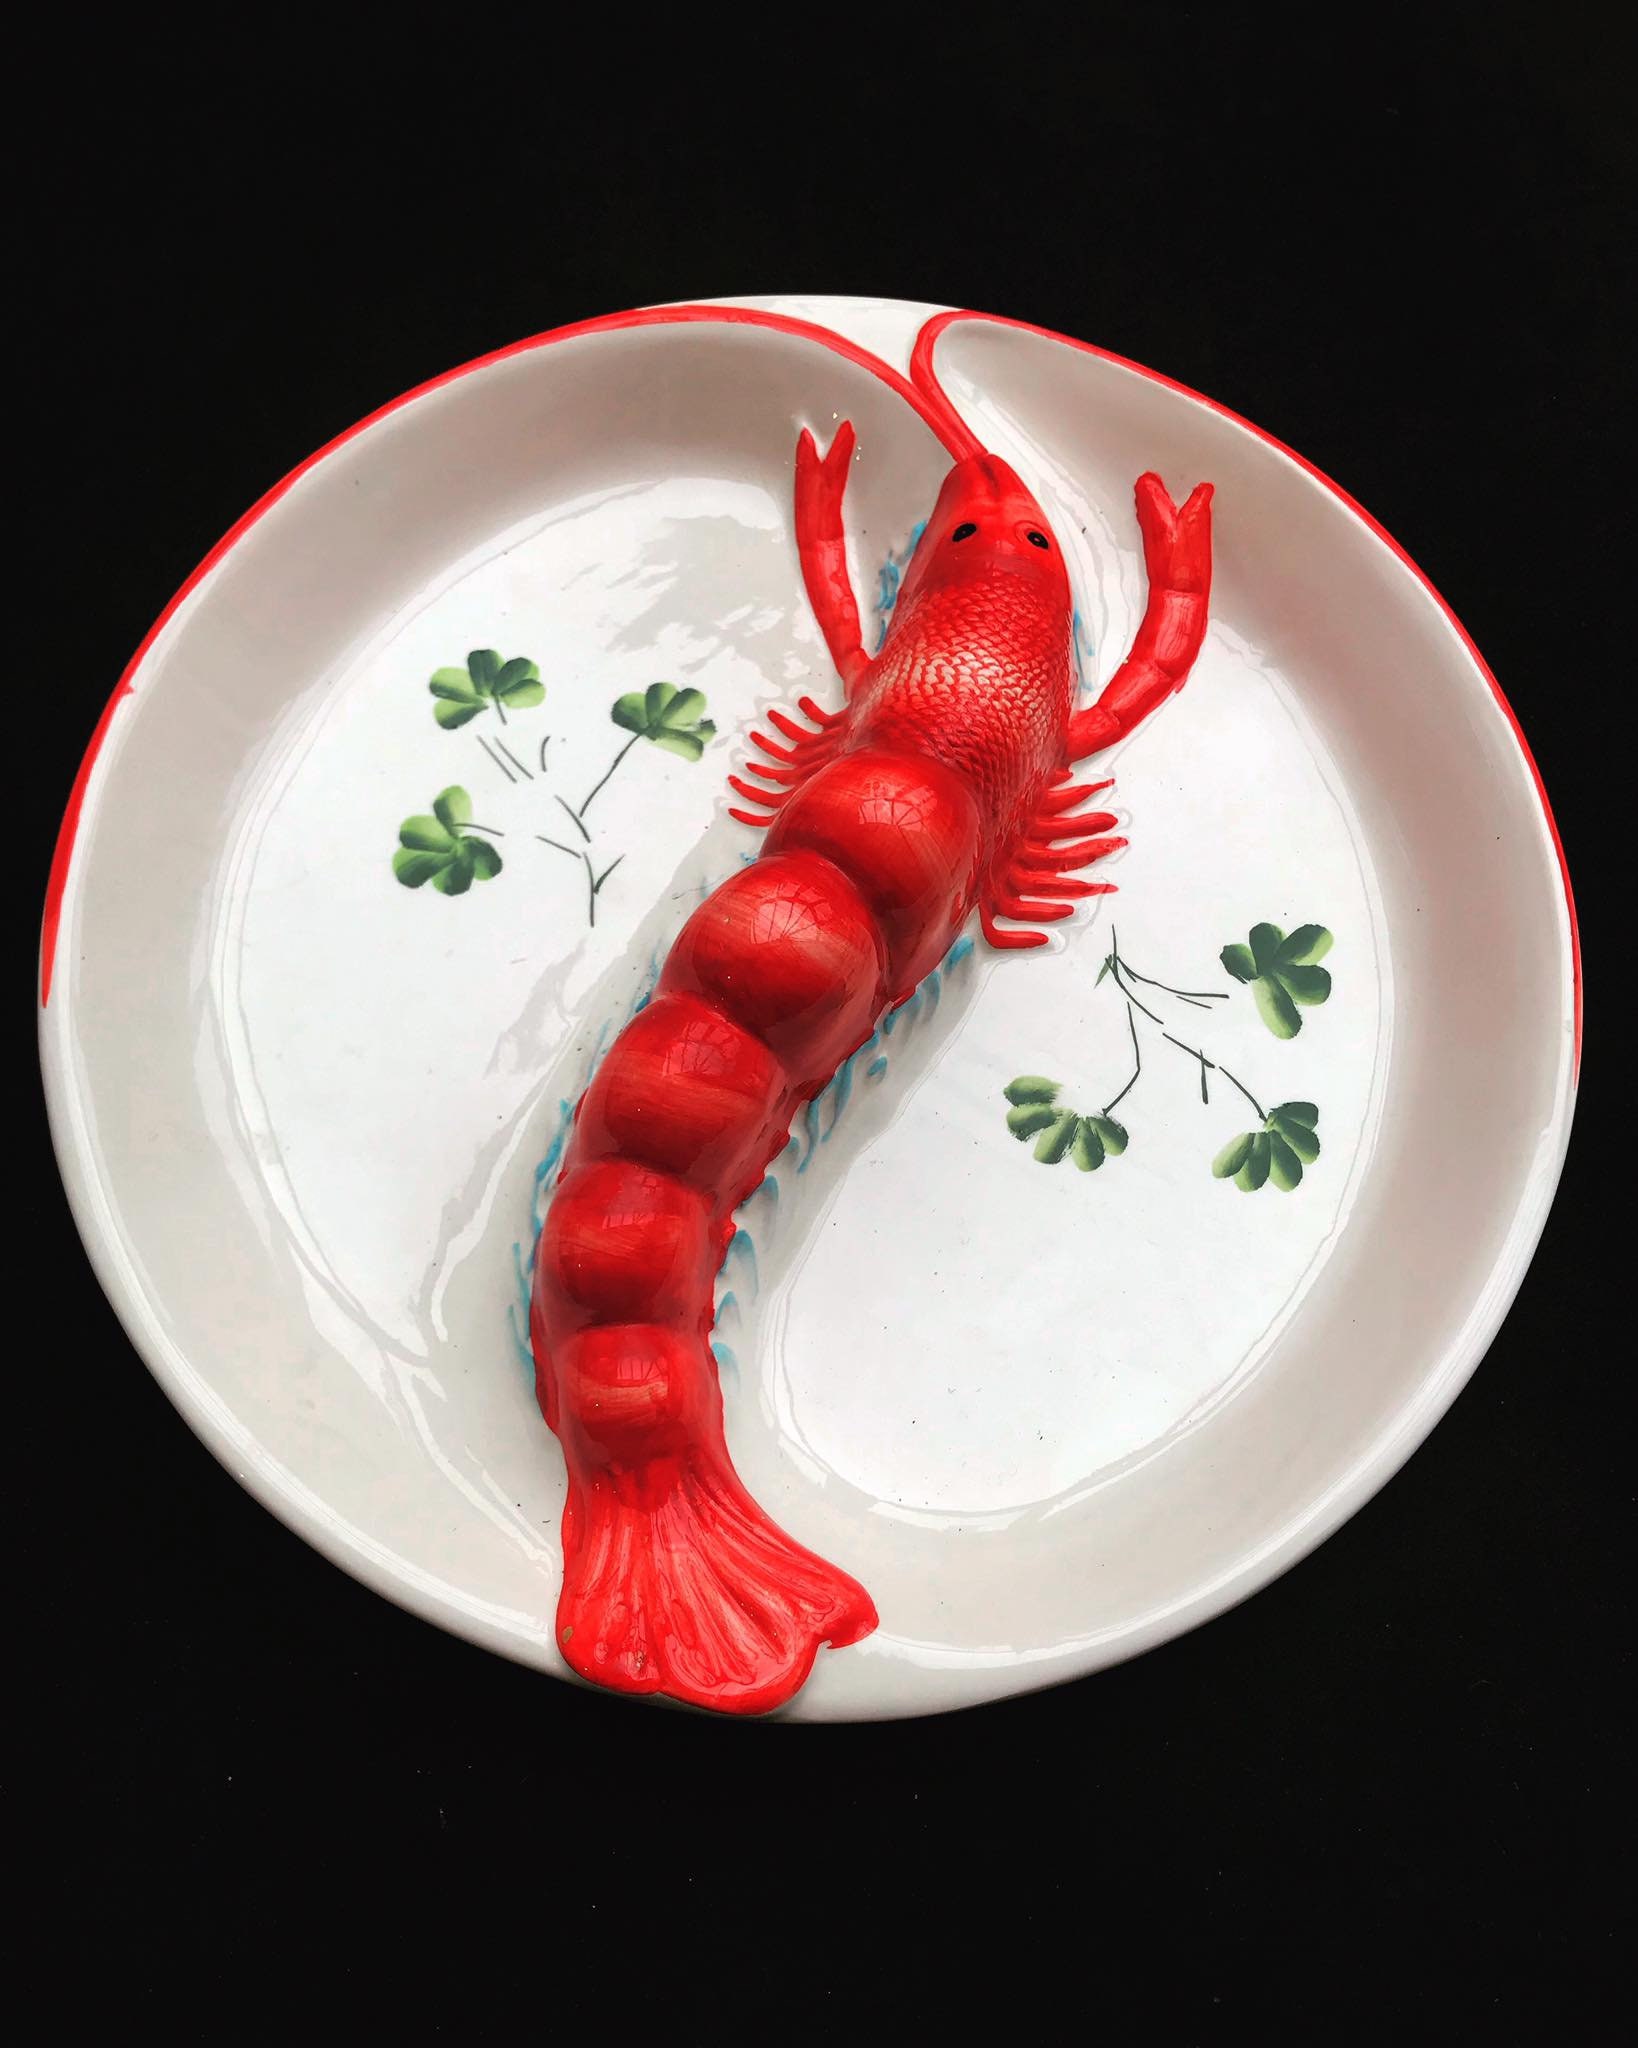 Lobster Plate Seafood Serving Plate Round Lobster Shellfish Appetizers Vegetables Hand Made Pottery Italy